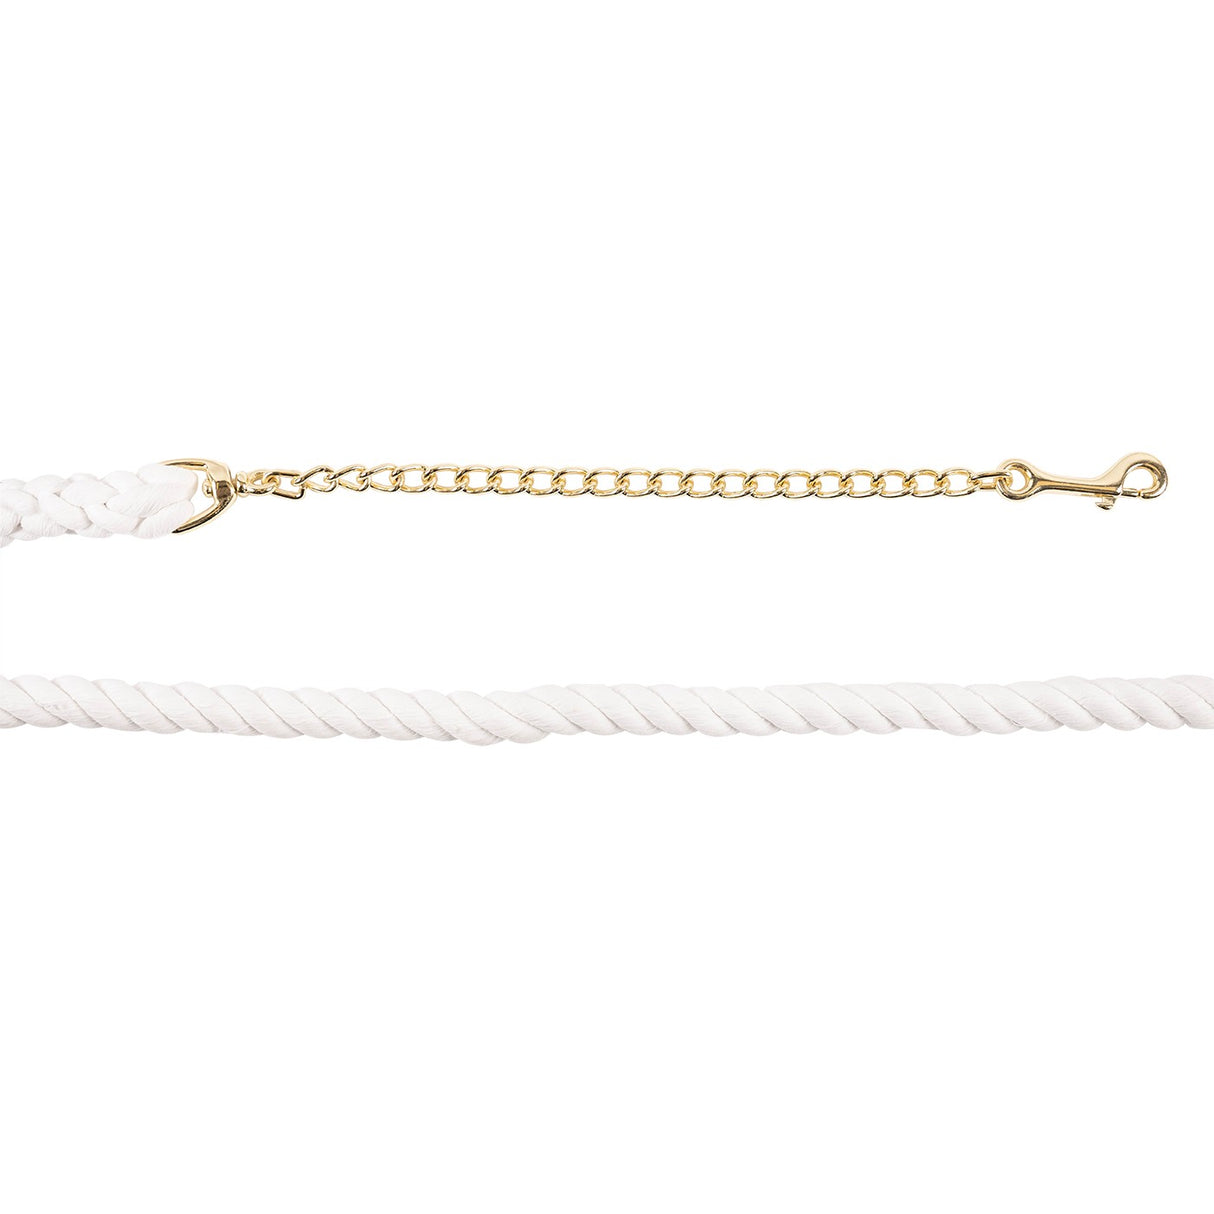 Shedrow Deluxe Cotton Rope W/ Chain